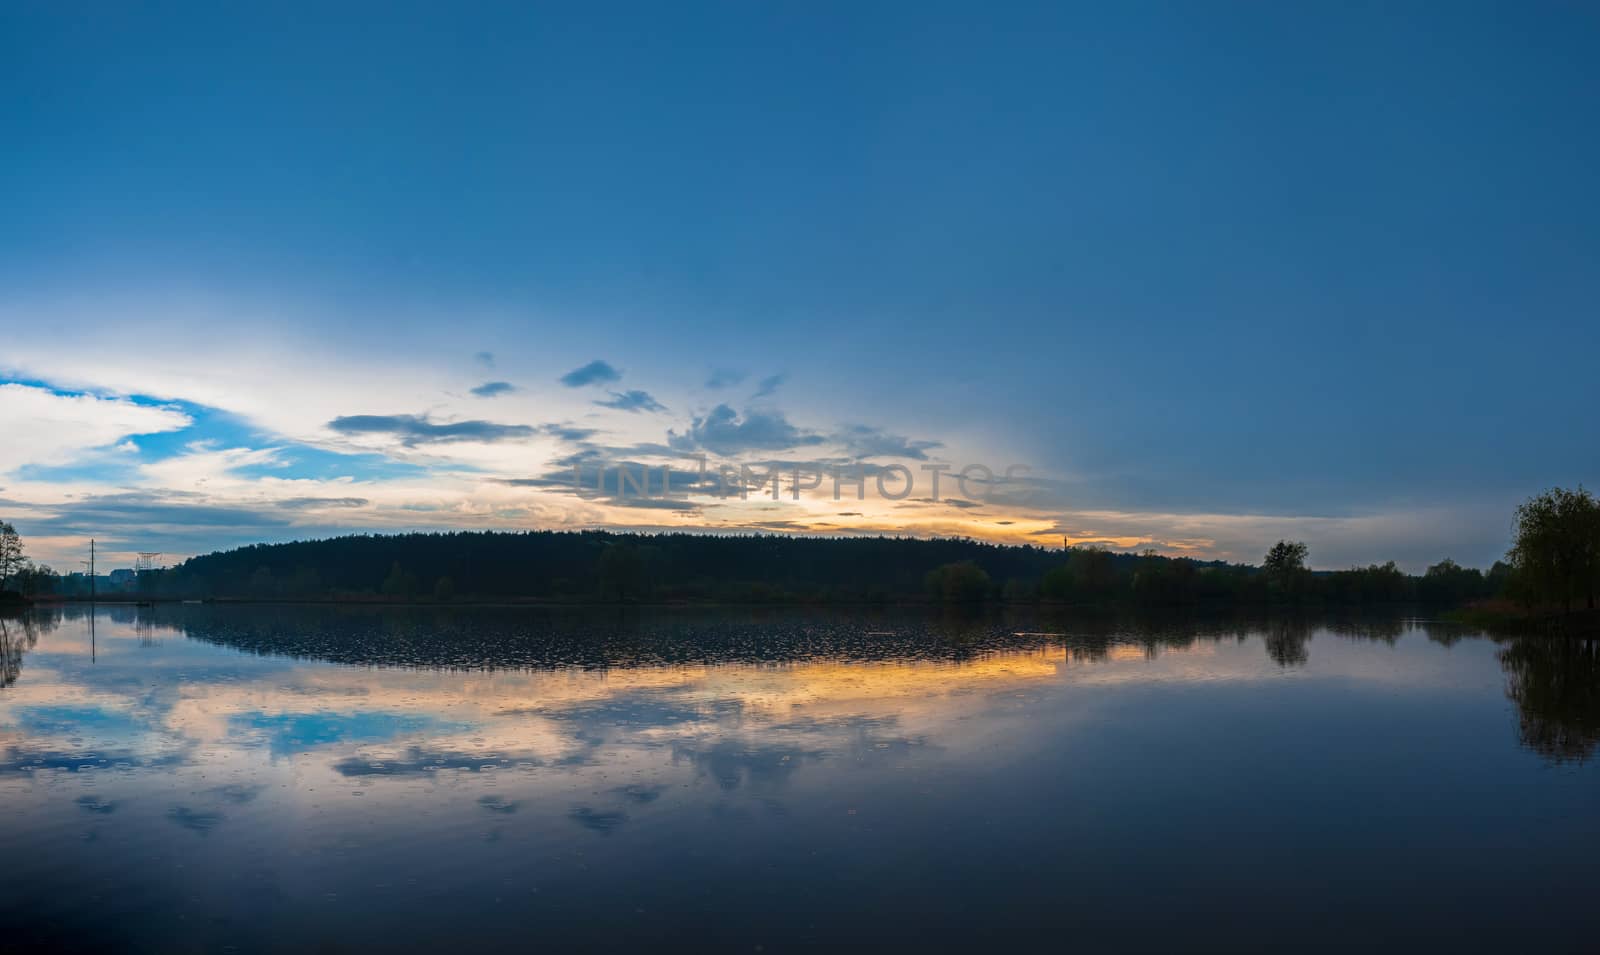 panoramic landscape view of a big blue river at sunset near the forest. Pond 14, known as the fifth glade. Kyiv, Ukraine by chernobrovin